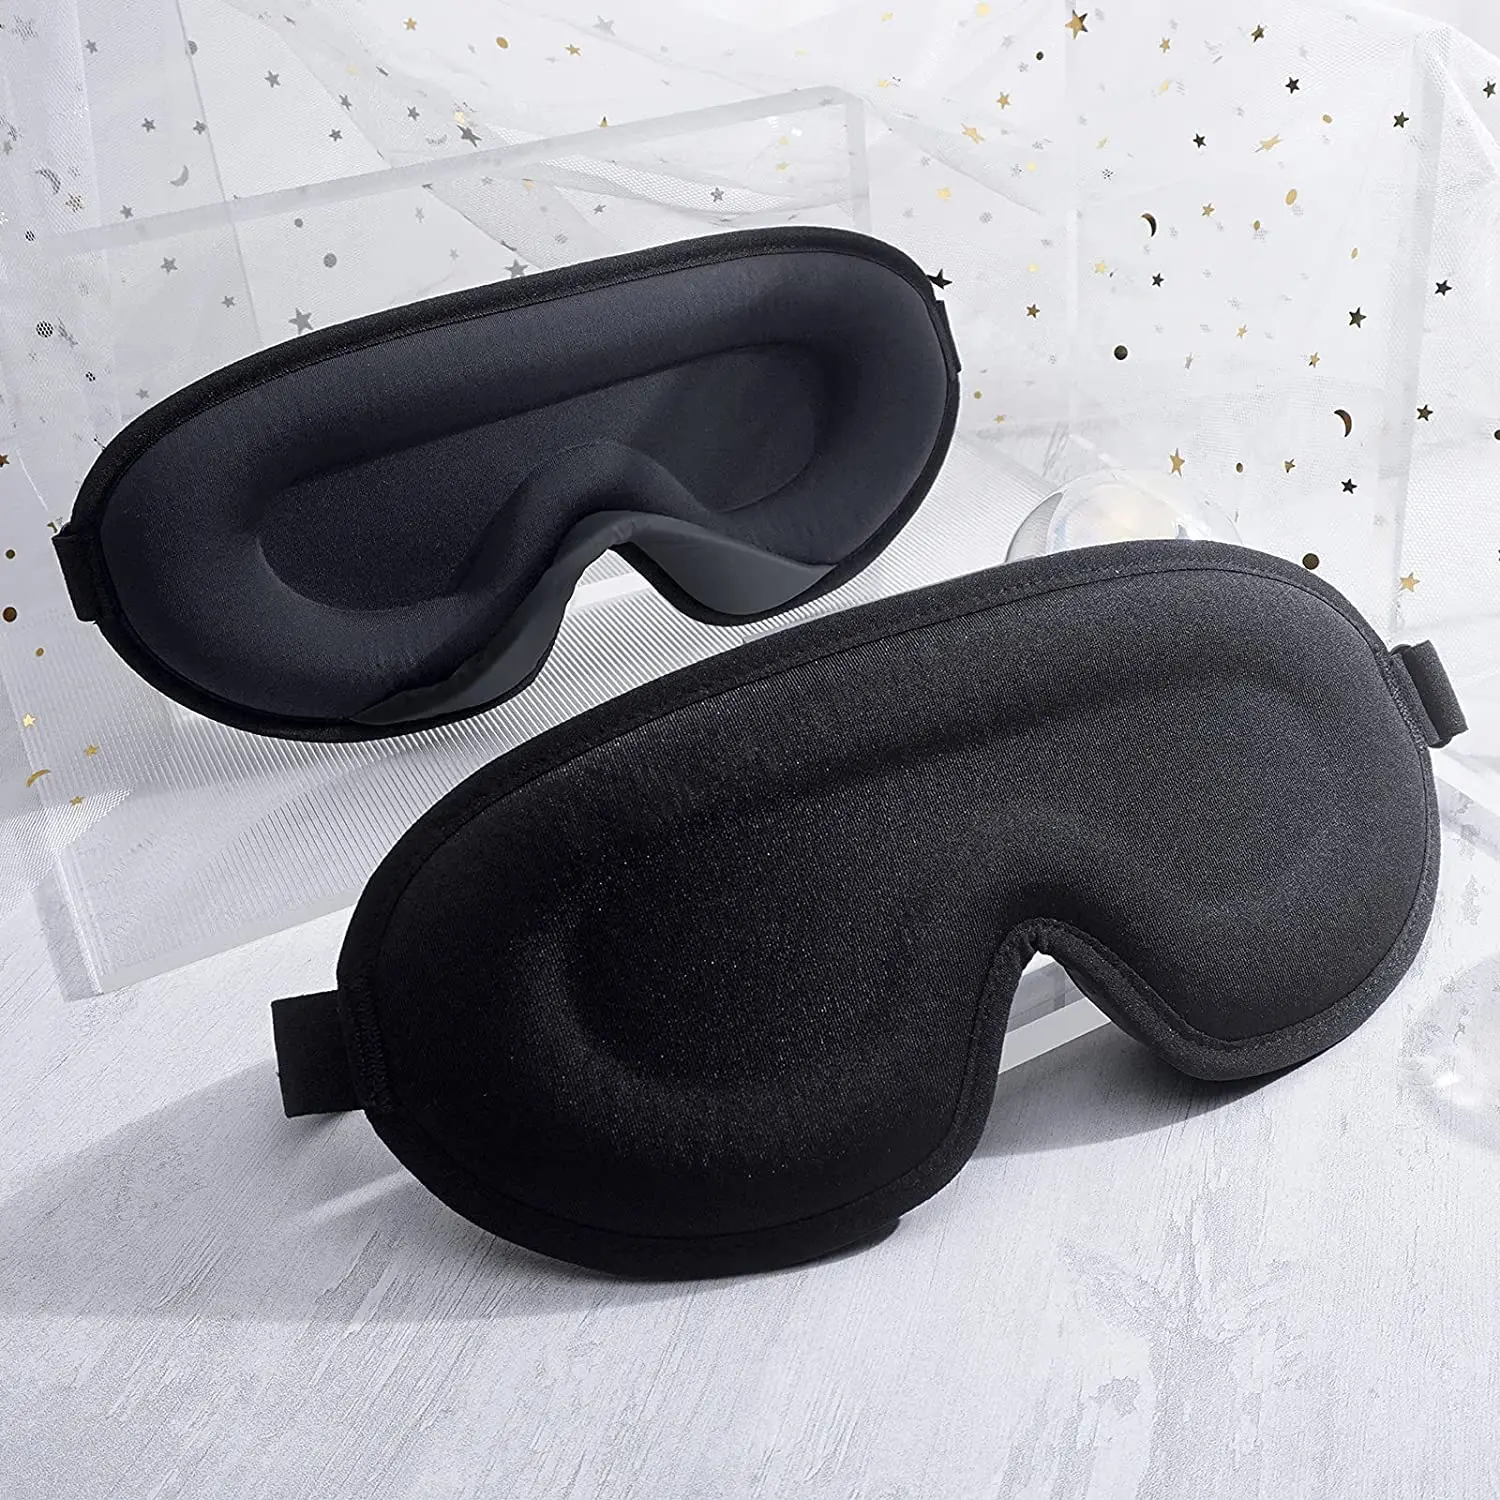 

Eye Mask for Sleeping 3D Contoured Cup Blindfold Concave Molded Night Sleep Mask Block Out Light with Women Men